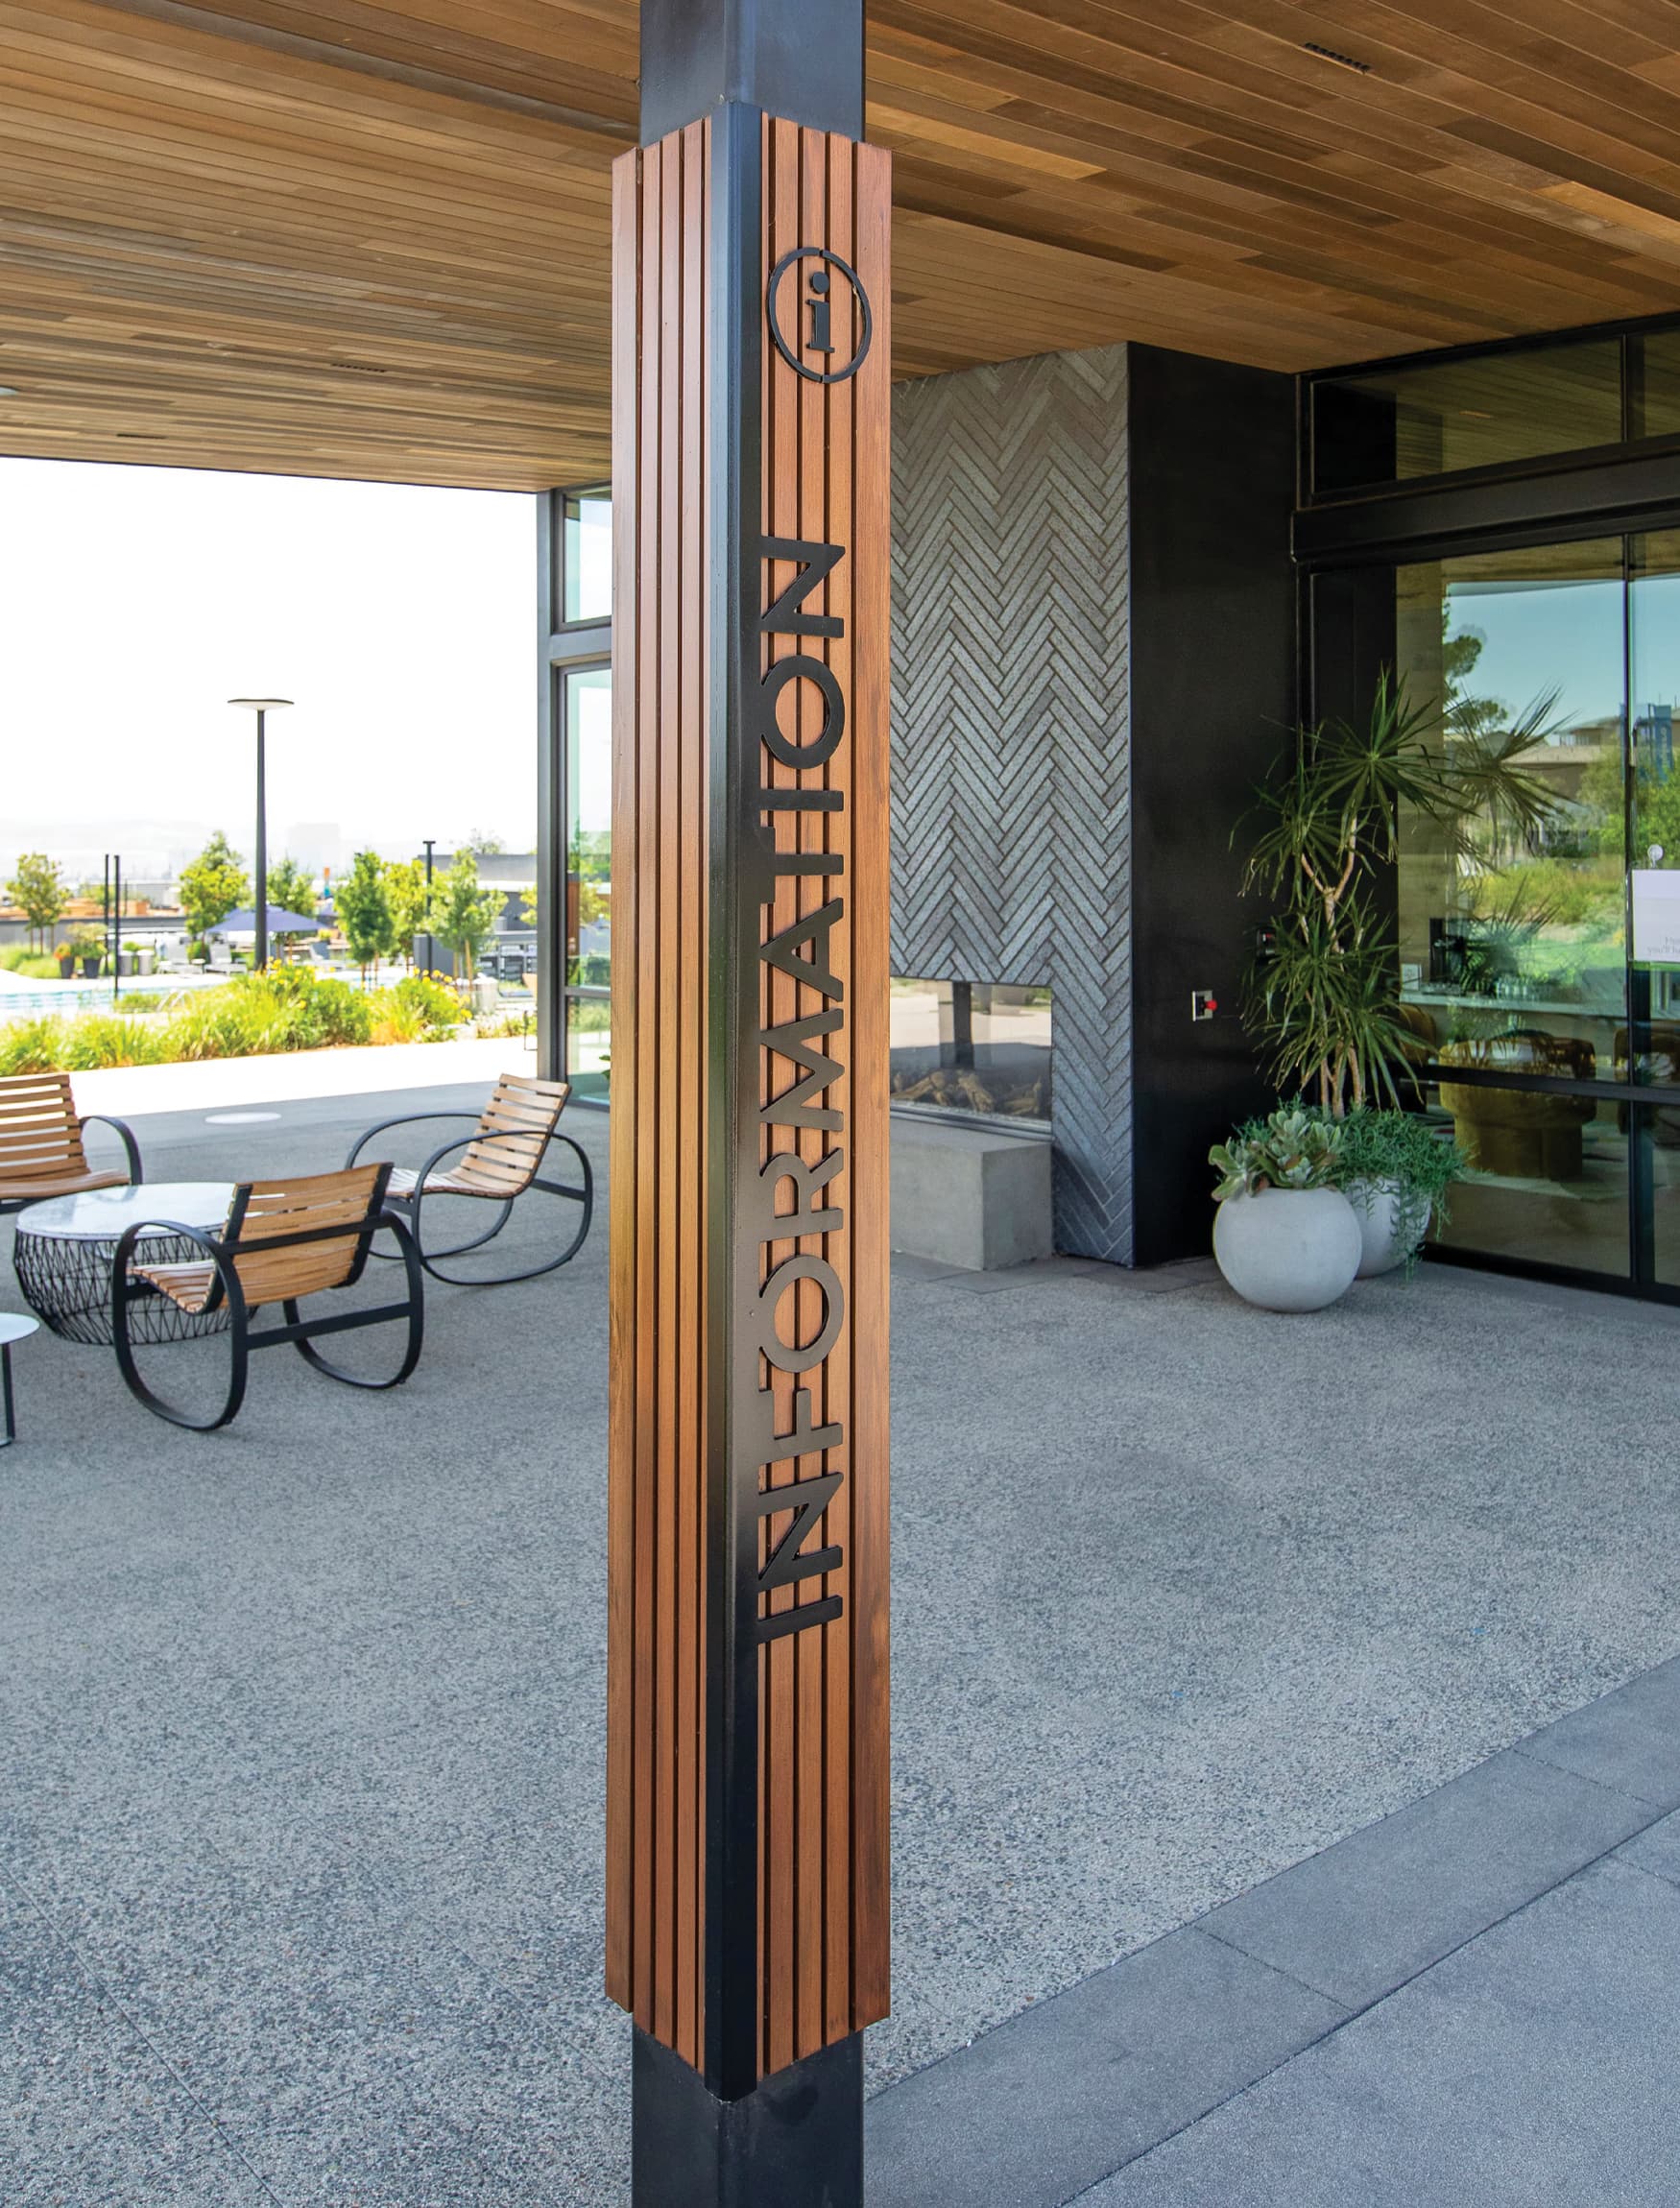 Wooden vertical information sign for Rise Park in Irvine, California.